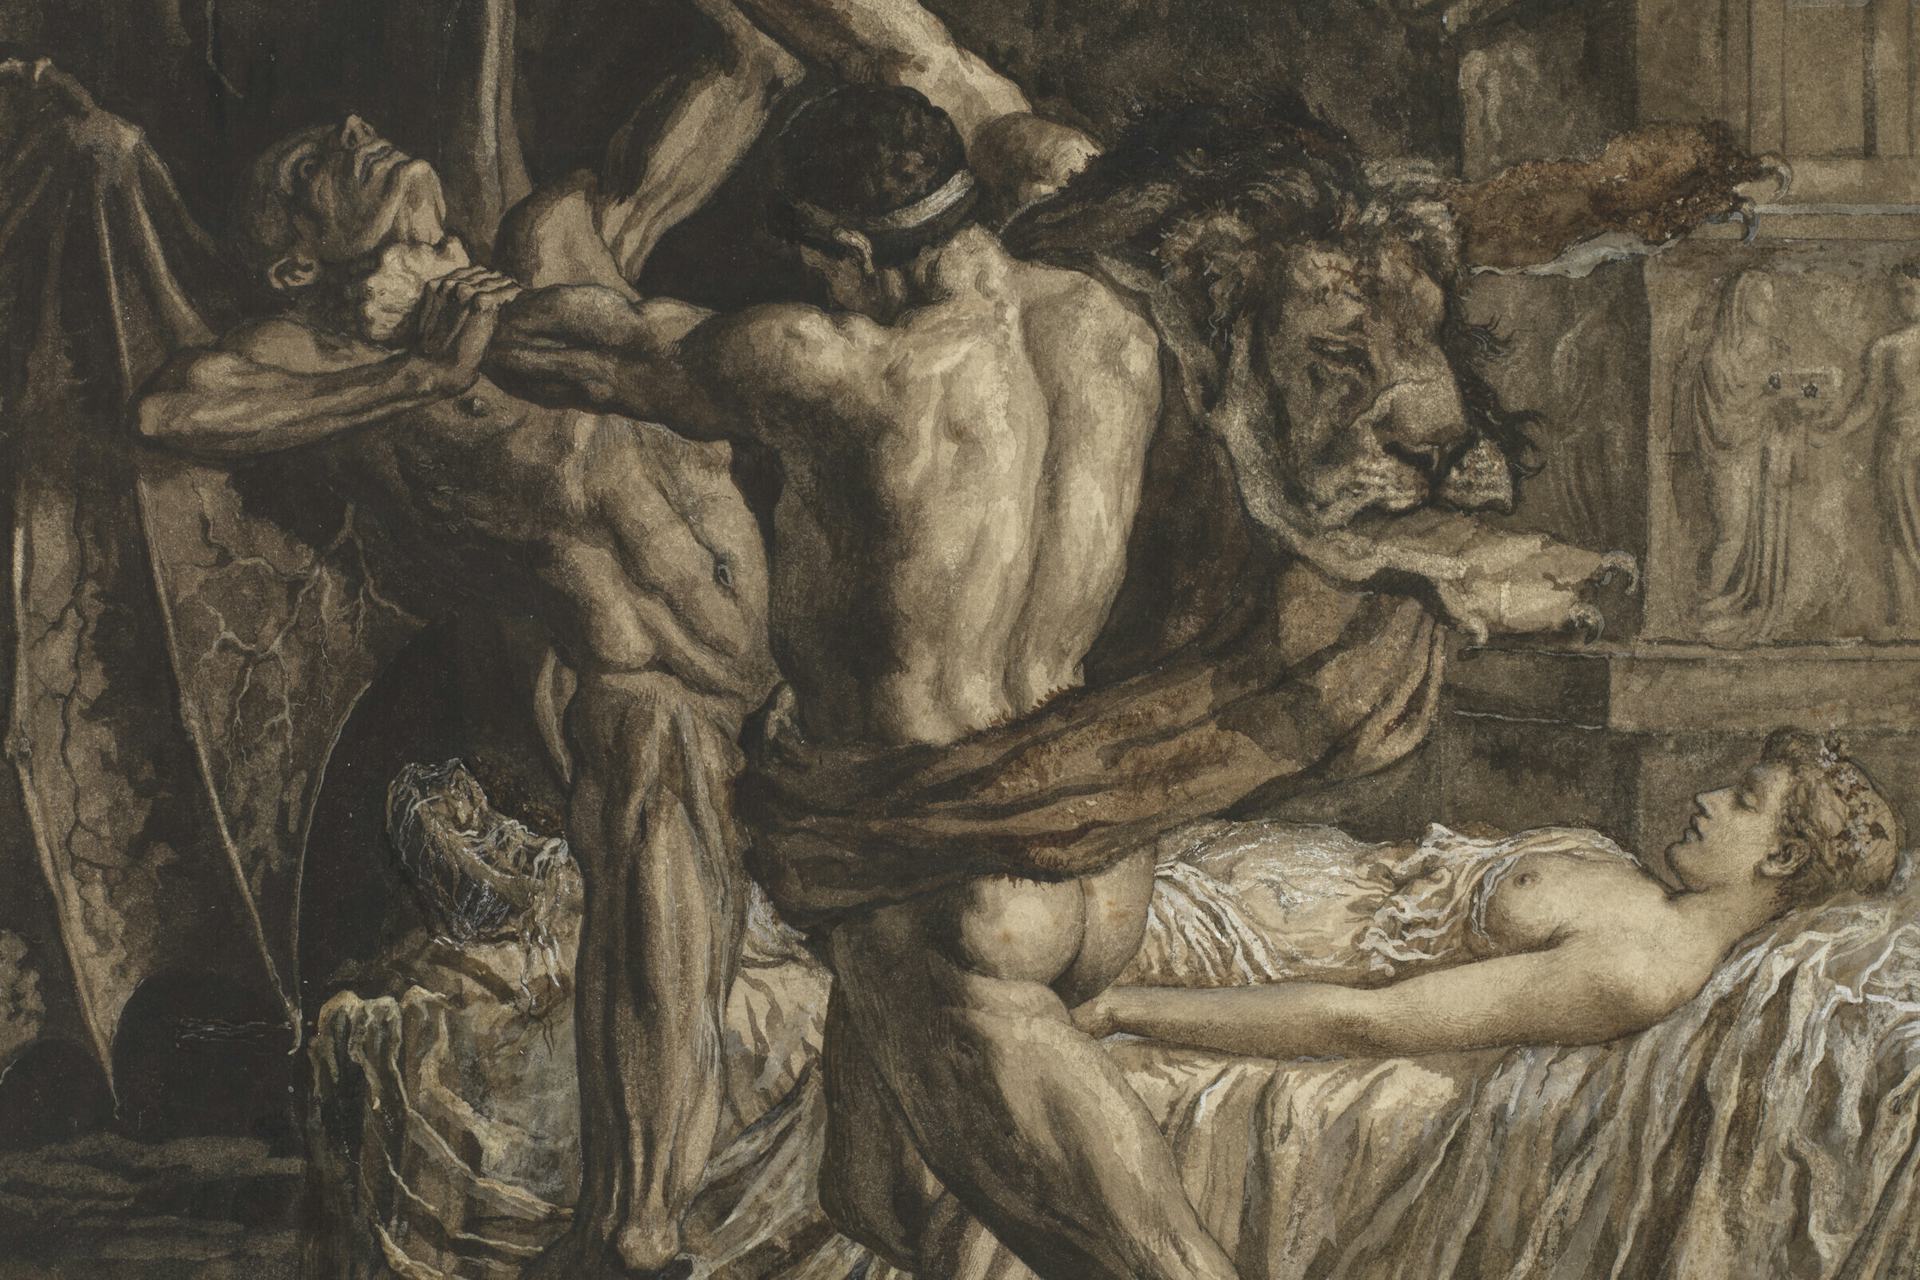 Hercules Wrestling with Death for the Soul of Alcestis by Herbert Thomas Dicksee (1884)